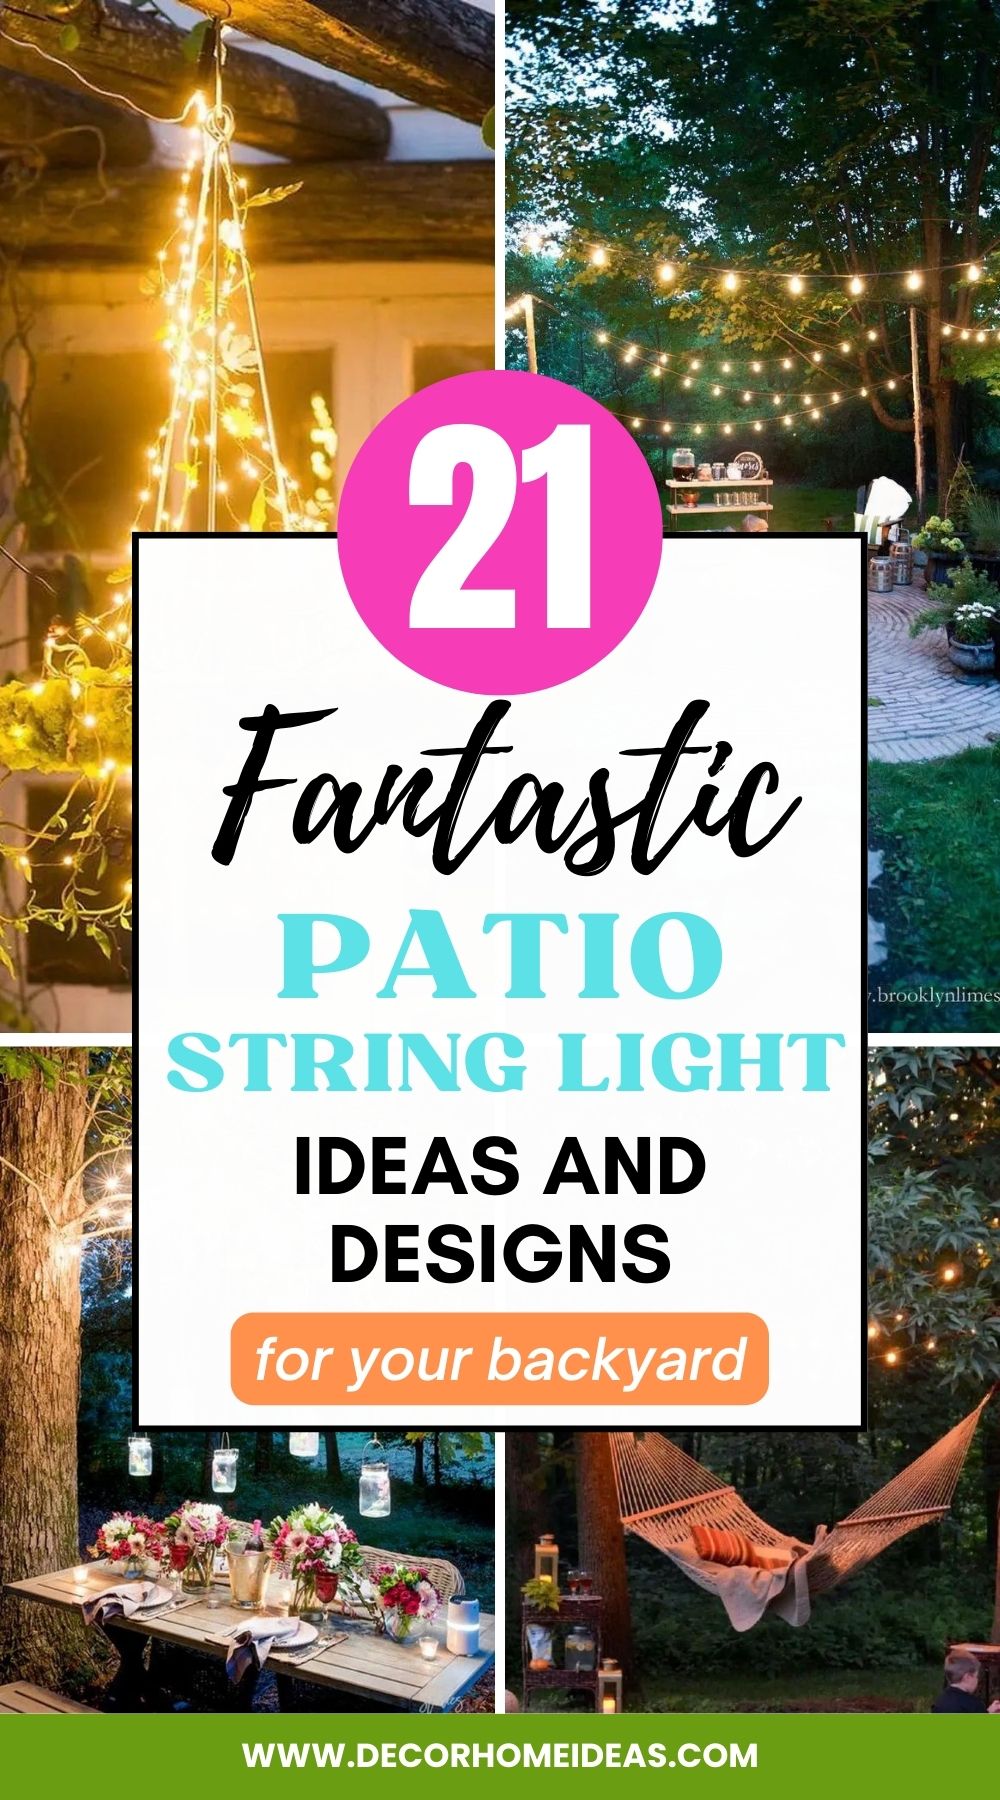 Looking for the perfect patio string light ideas for your backyard garden? Check out our 21 best ideas to light up your garden and create a cozy atmosphere!